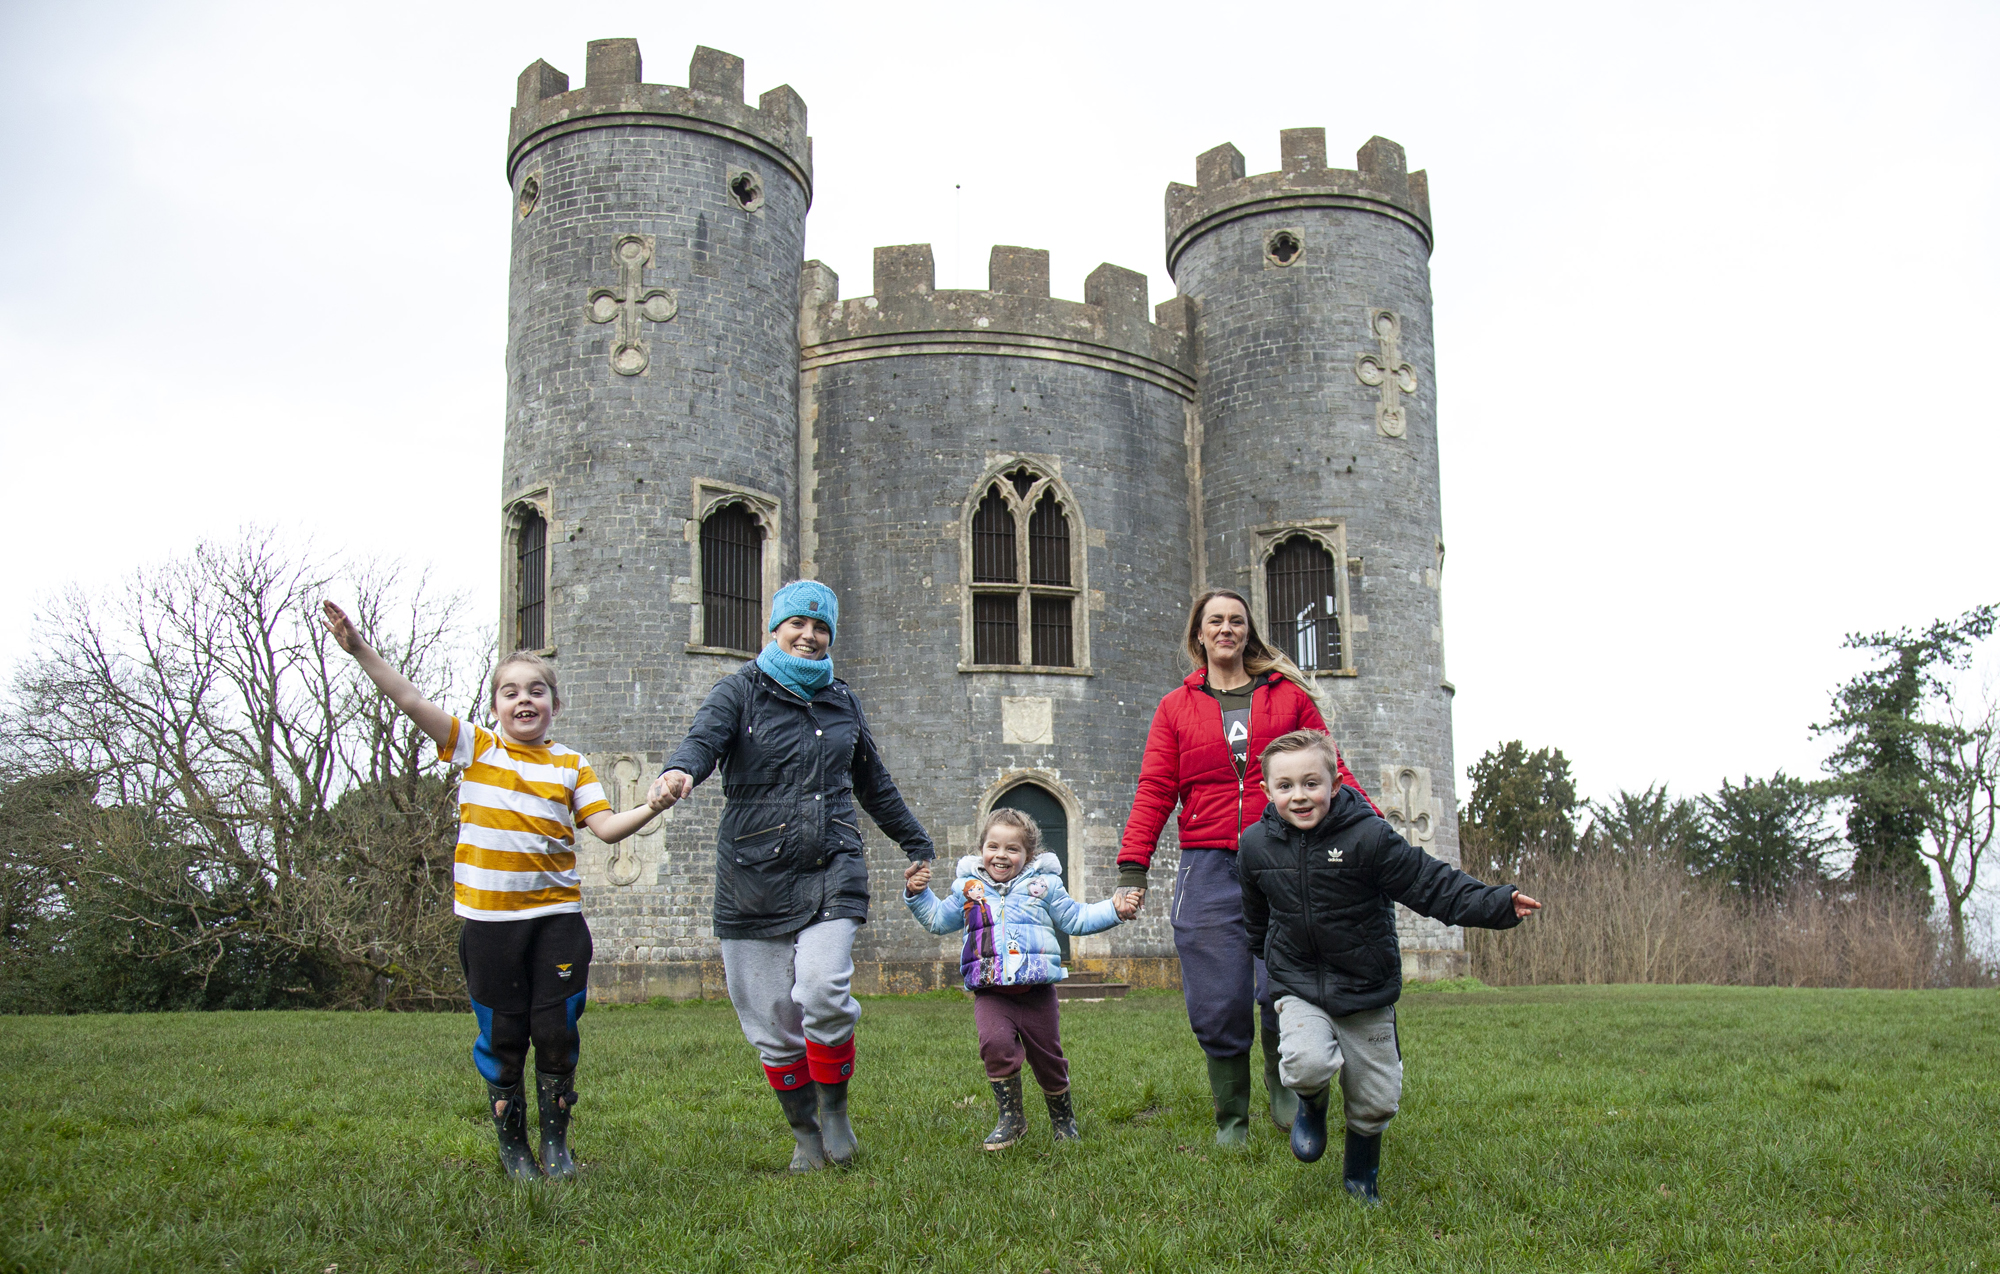 Adults and children running playfully with Blaise castle in the background